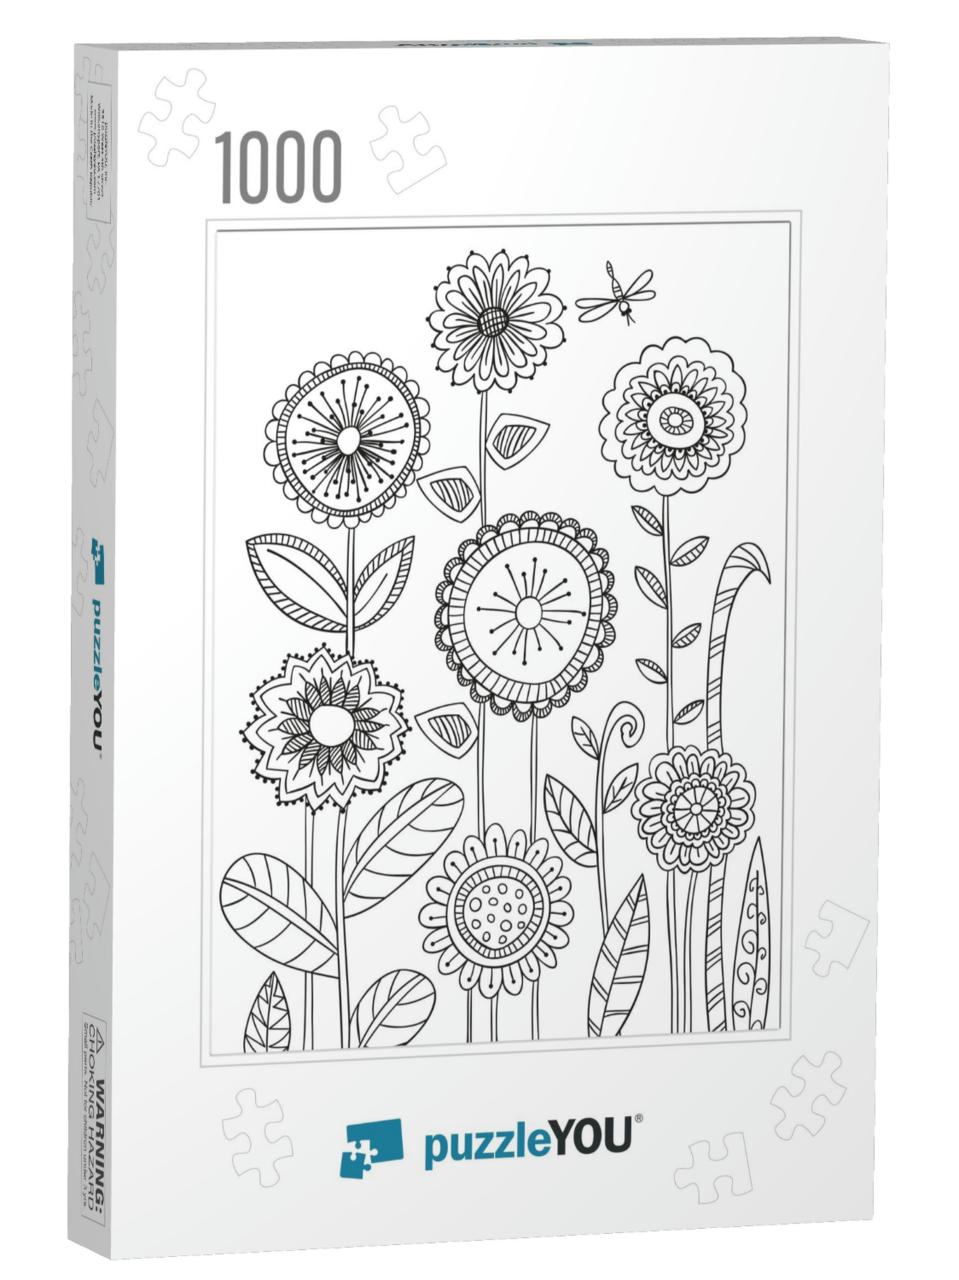 Coloring Book Page with Flowers in Zentagle Stily. Hand D... Jigsaw Puzzle with 1000 pieces